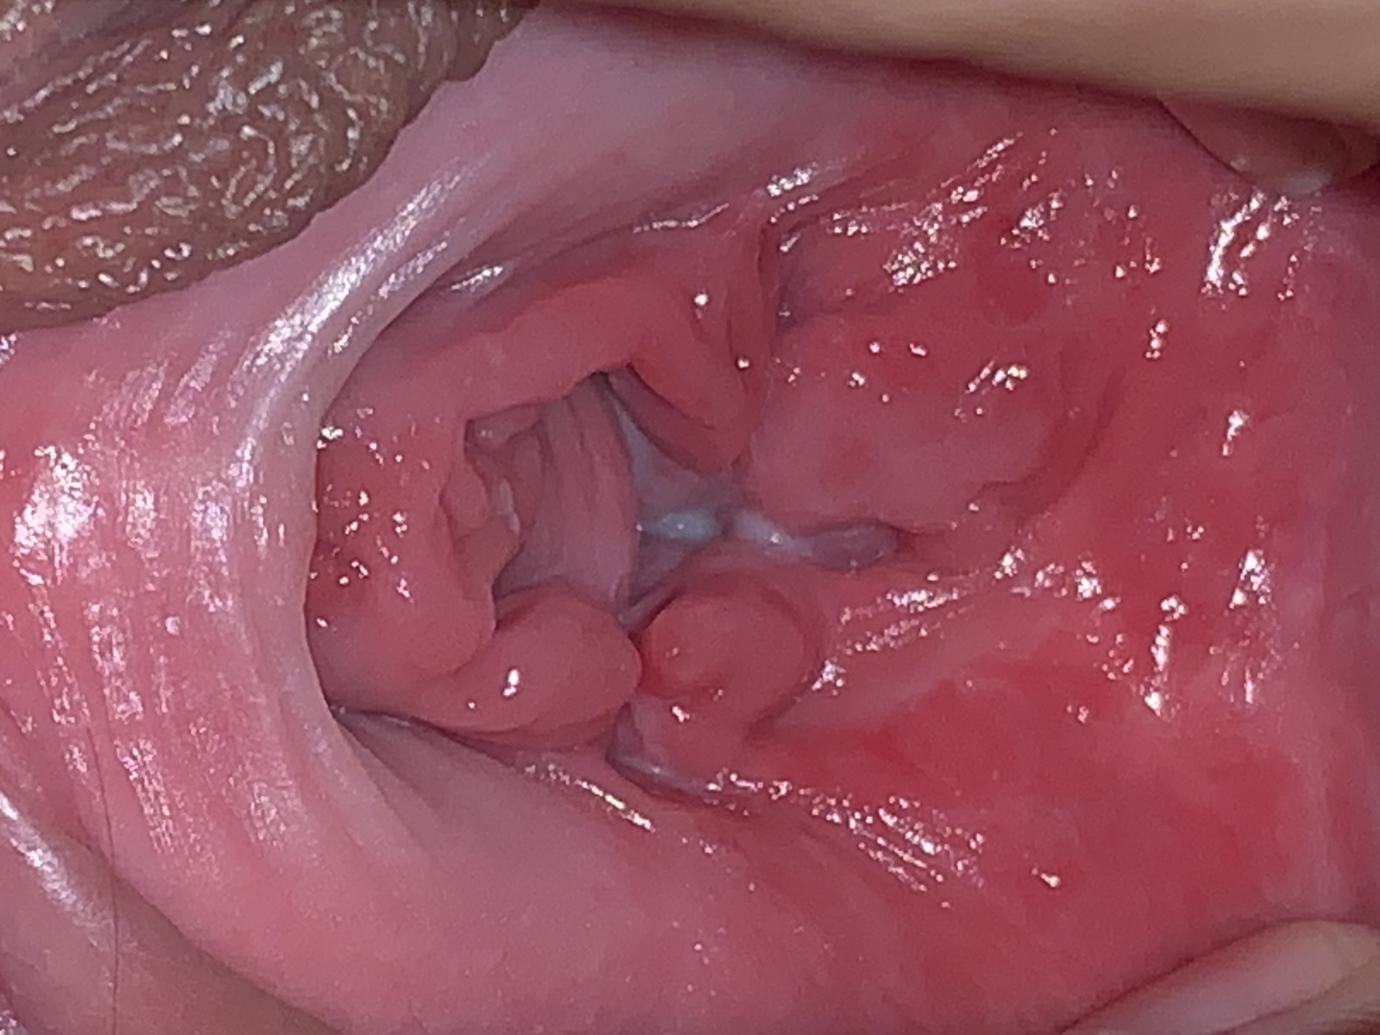 Vaginal Canal And Openings Has Cysts Or BumpsHELP.